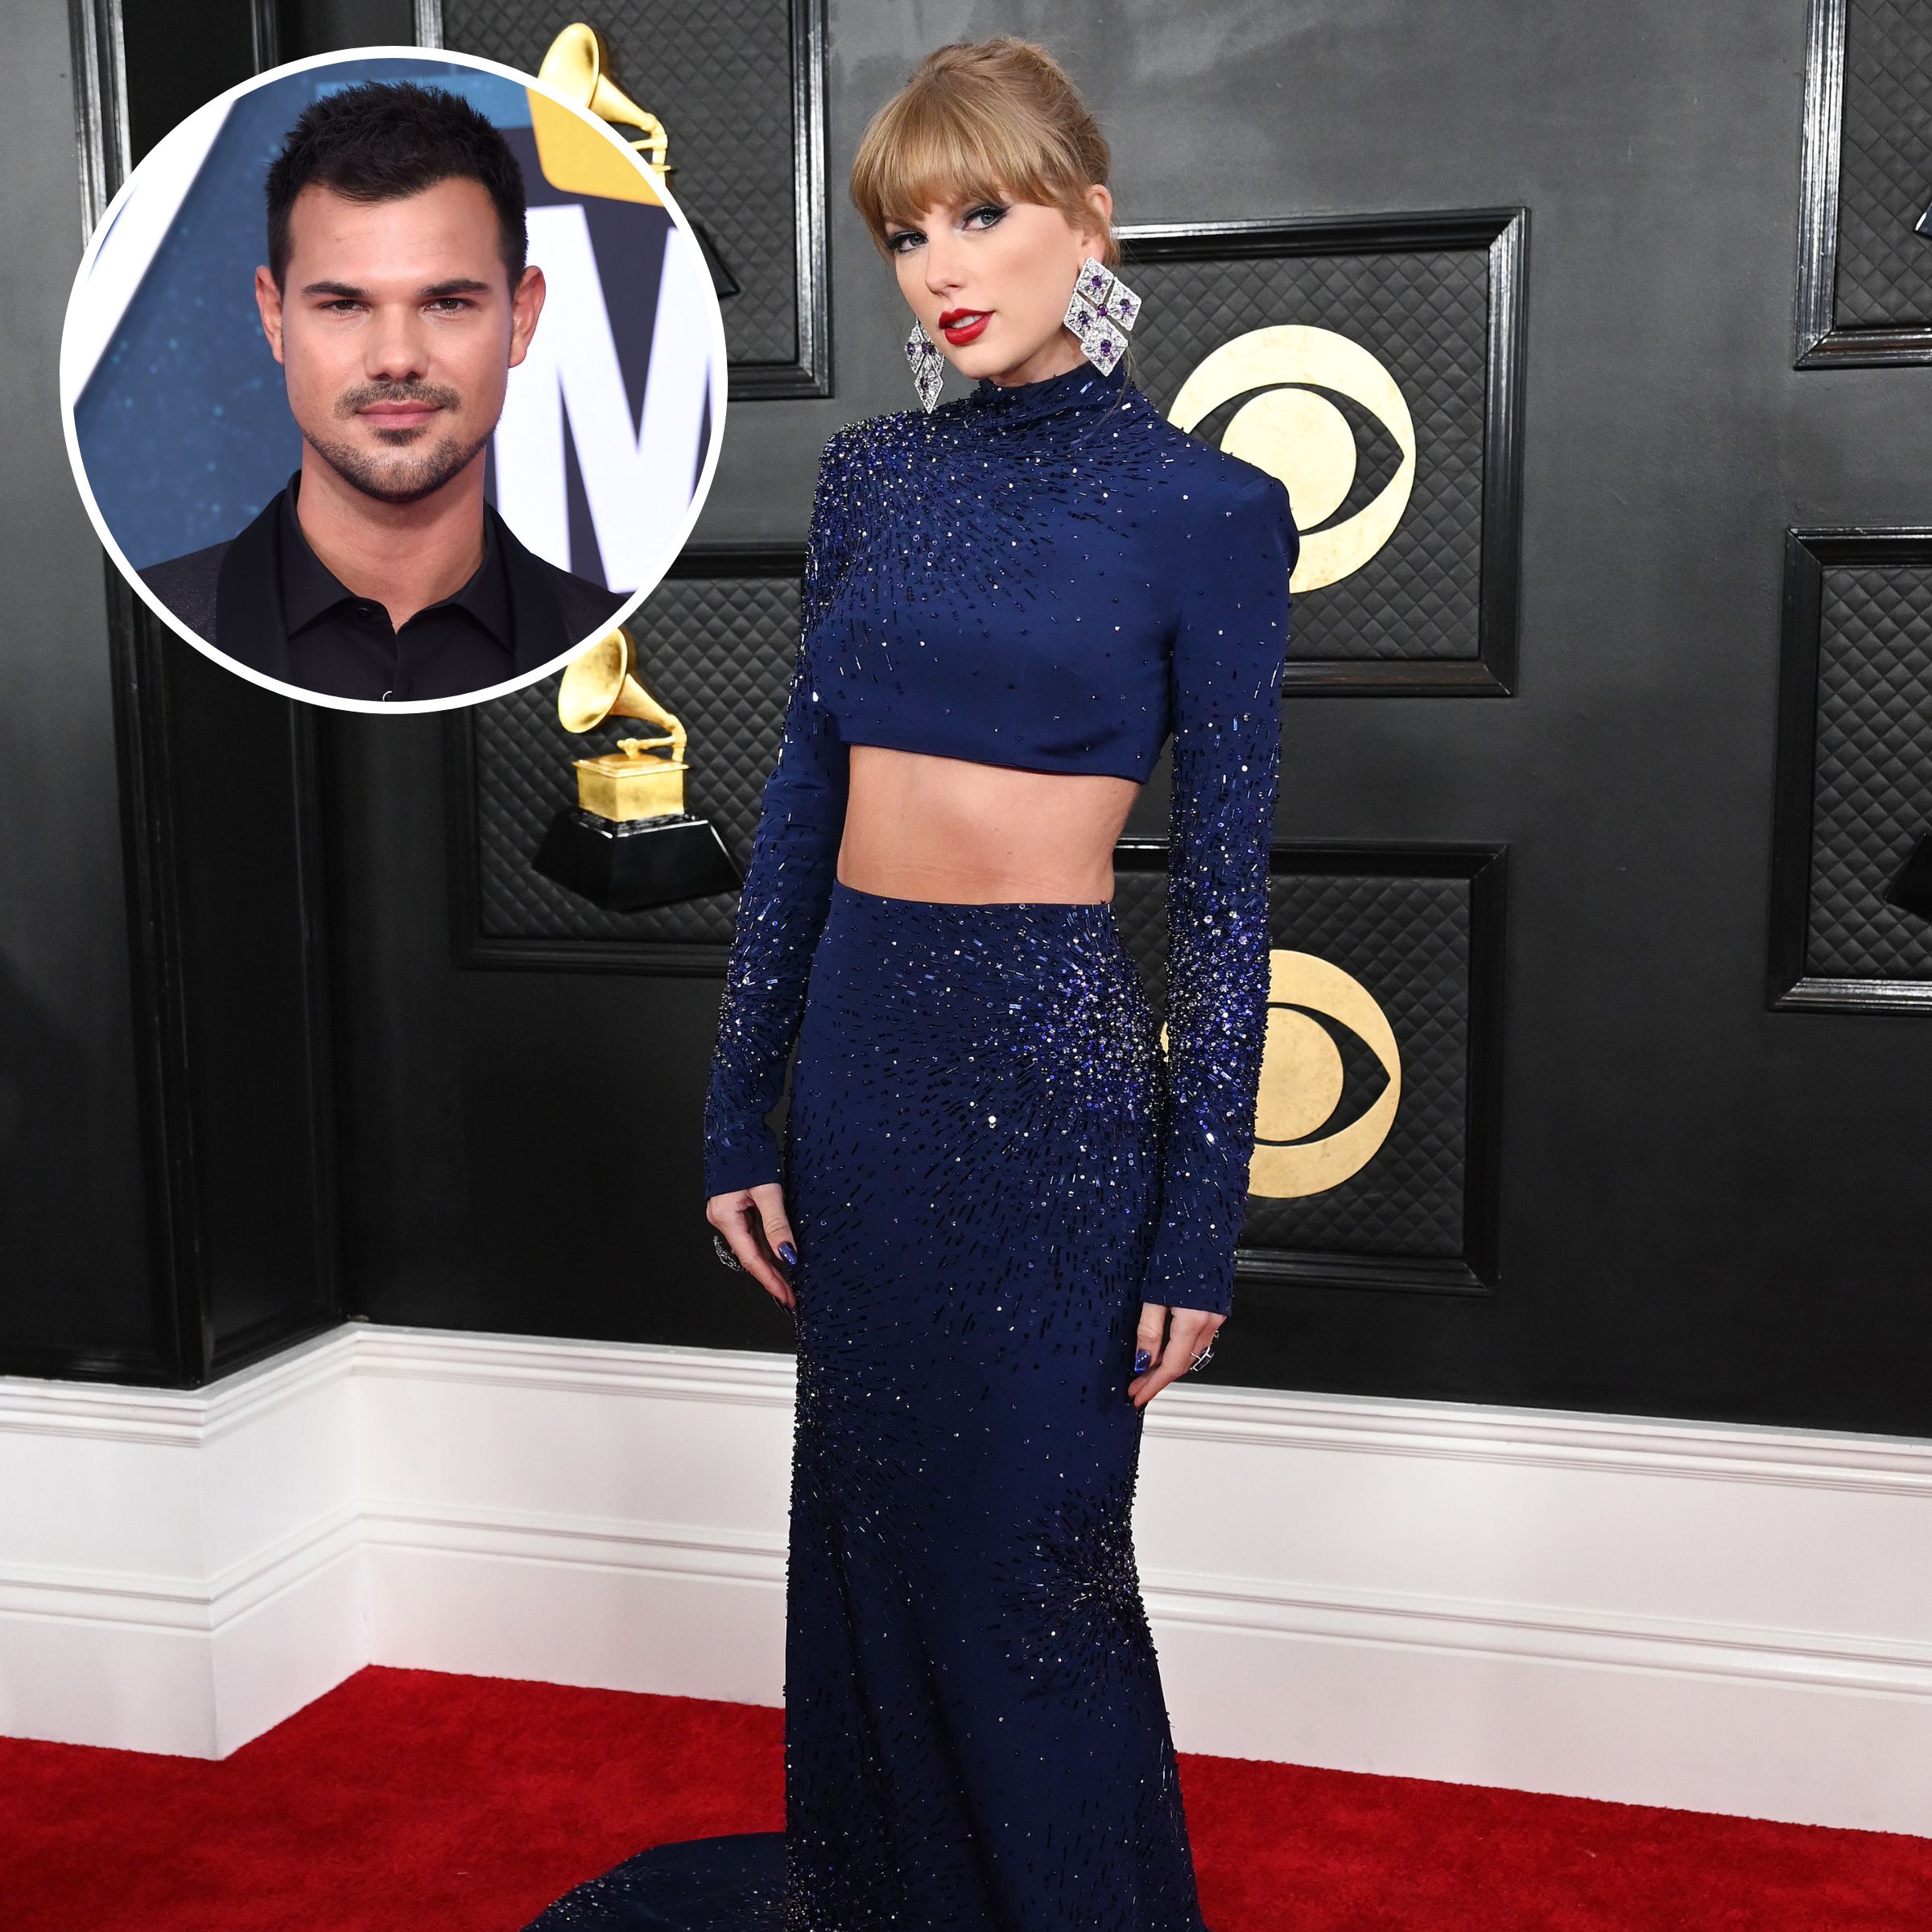 What Taylor Swift Songs Are About Taylor Lautner? Titles, Details | J-14